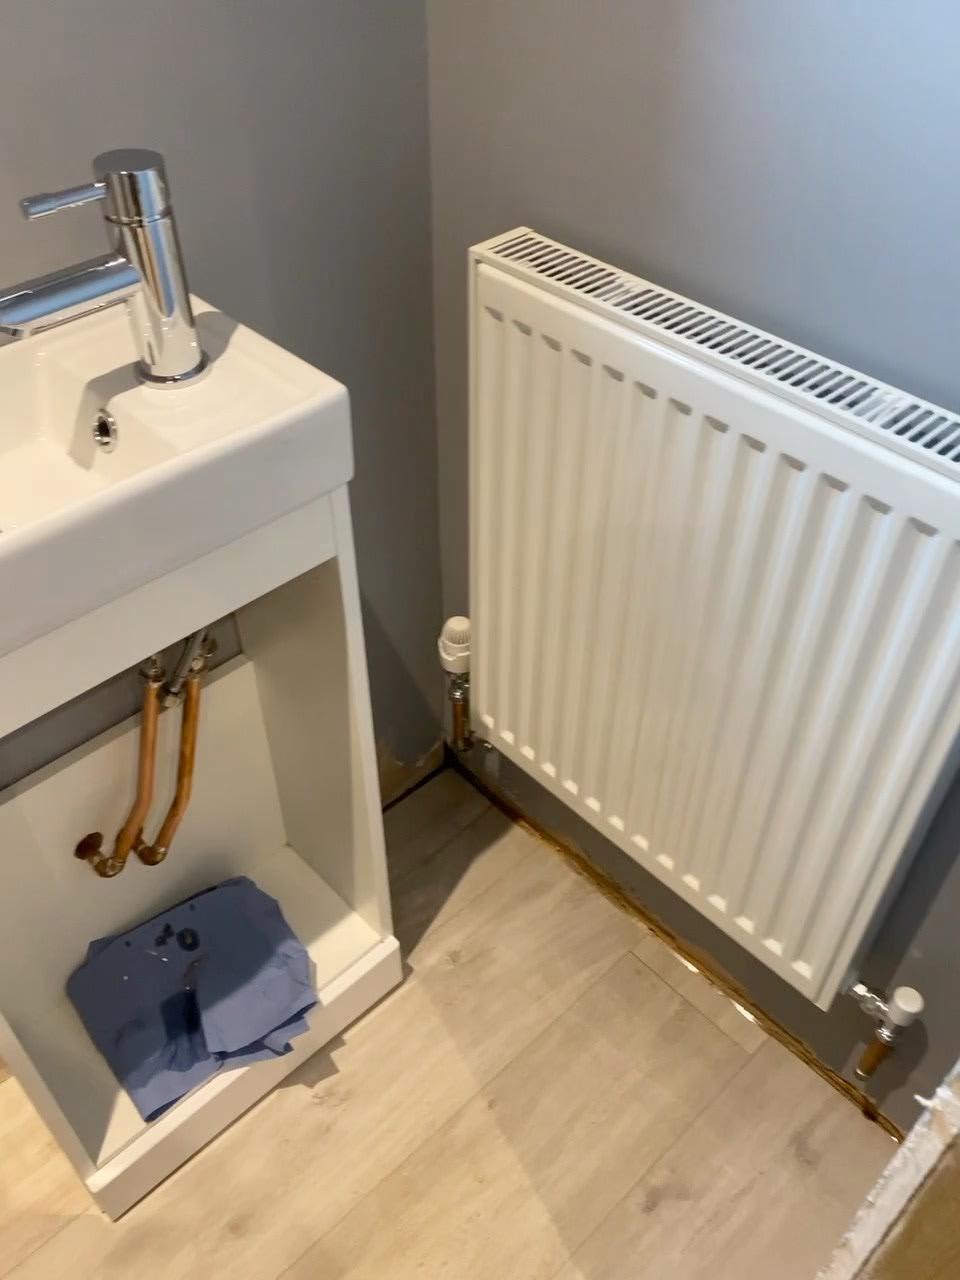 Hinton Plumbing Heating Droitwich 07702 624585